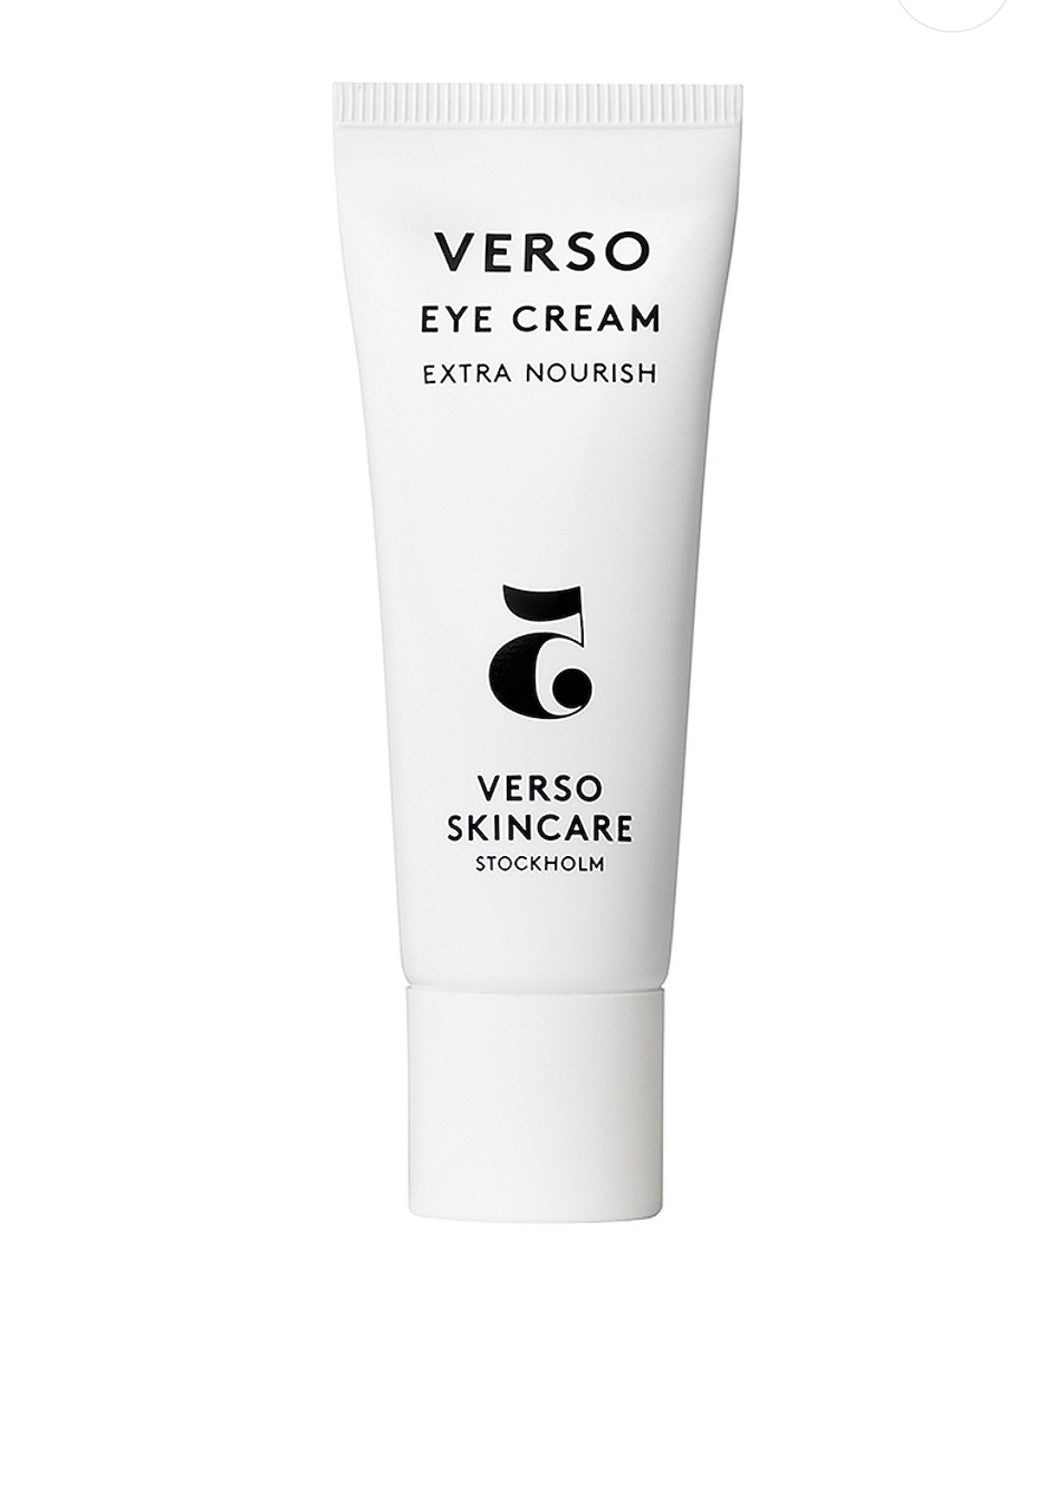 A NOURISHING AND MOISTURIZING EYE CREAM Verso Eye Cream is a rich formula with moisturizing and nutrient benefits that provide instant and long-term nutrition to the delicate skin around the eyes. It strengthens the skin’s barrier while ensuring a healthy moisture level. Verso Eye Cream is the perfect remedy for skin that tends to become dry and leaves the eye area soft, smooth and supple.